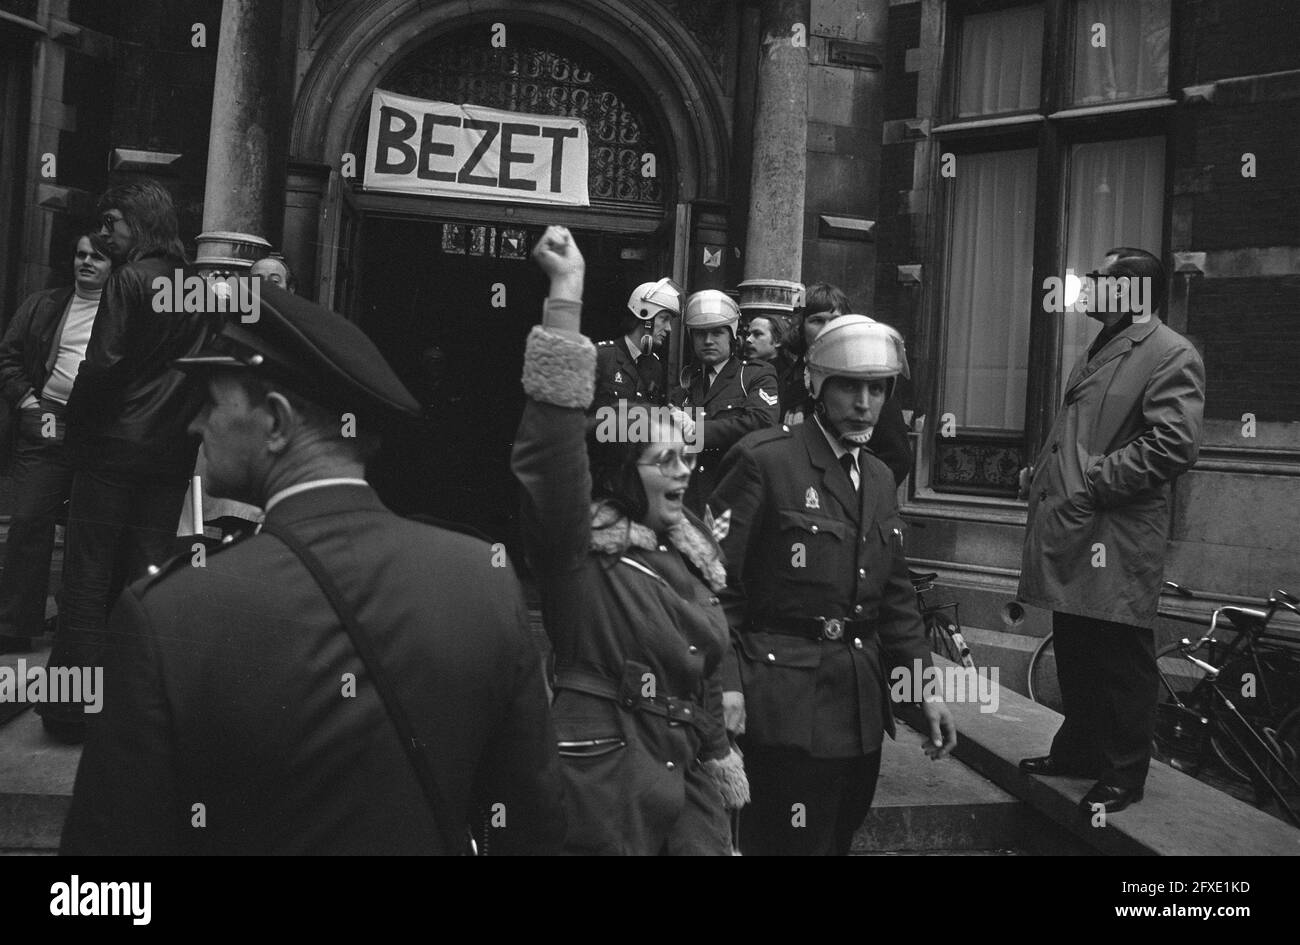 Students removed from Utrecht University, helmeted policemen lead girl out, February 15, 1973, POLICE AGENTS, STUDENTS, girls, universities, The Netherlands, 20th century press agency photo, news to remember, documentary, historic photography 1945-1990, visual stories, human history of the Twentieth Century, capturing moments in time Stock Photo